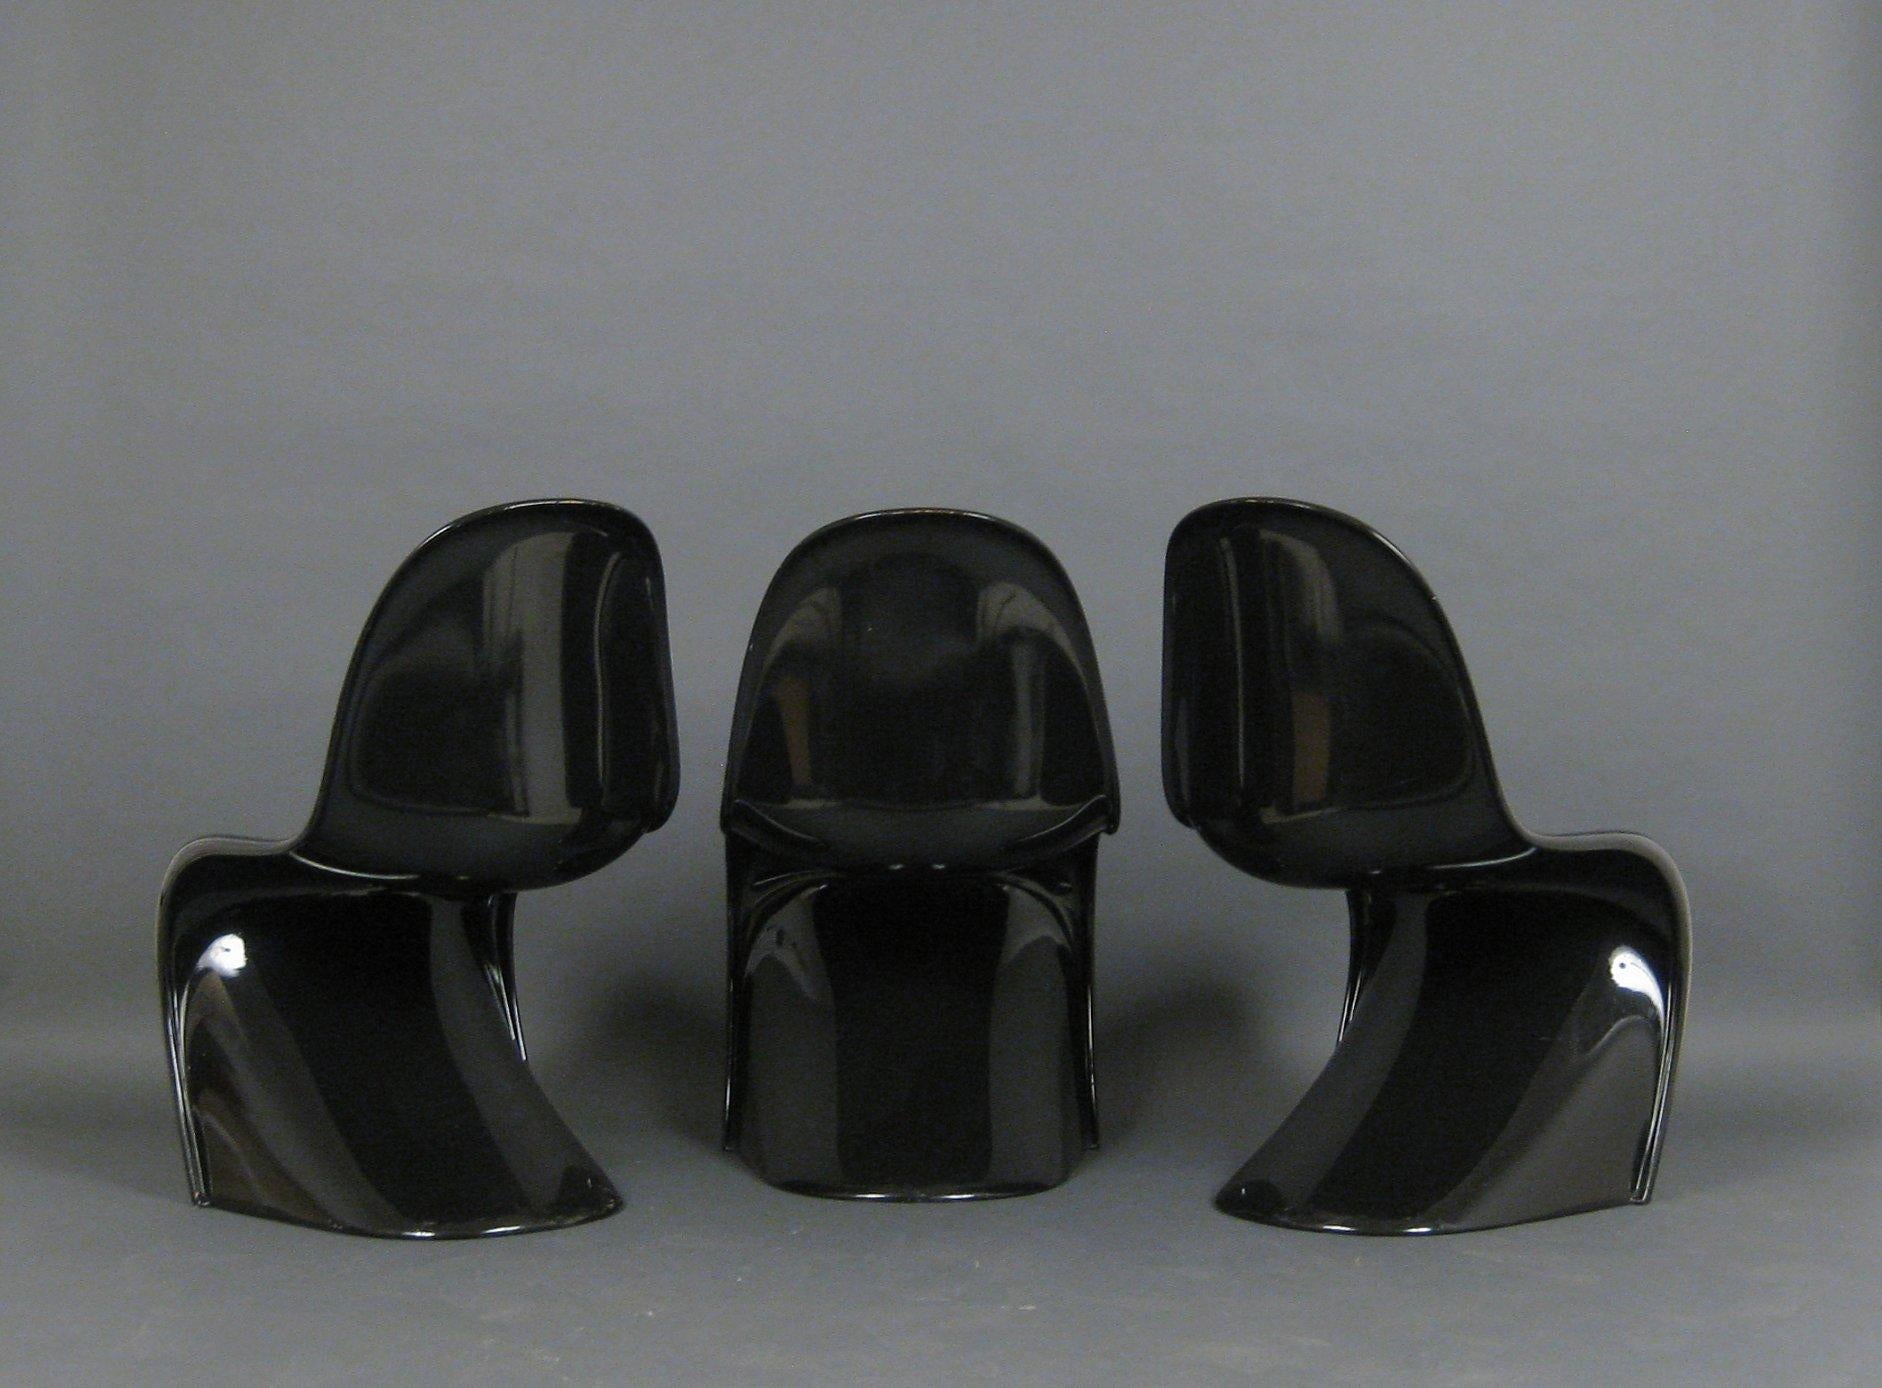 Other Verner Panton Set of Three Panton Chairs 1. Serie Baydur for Fehlbaum Production